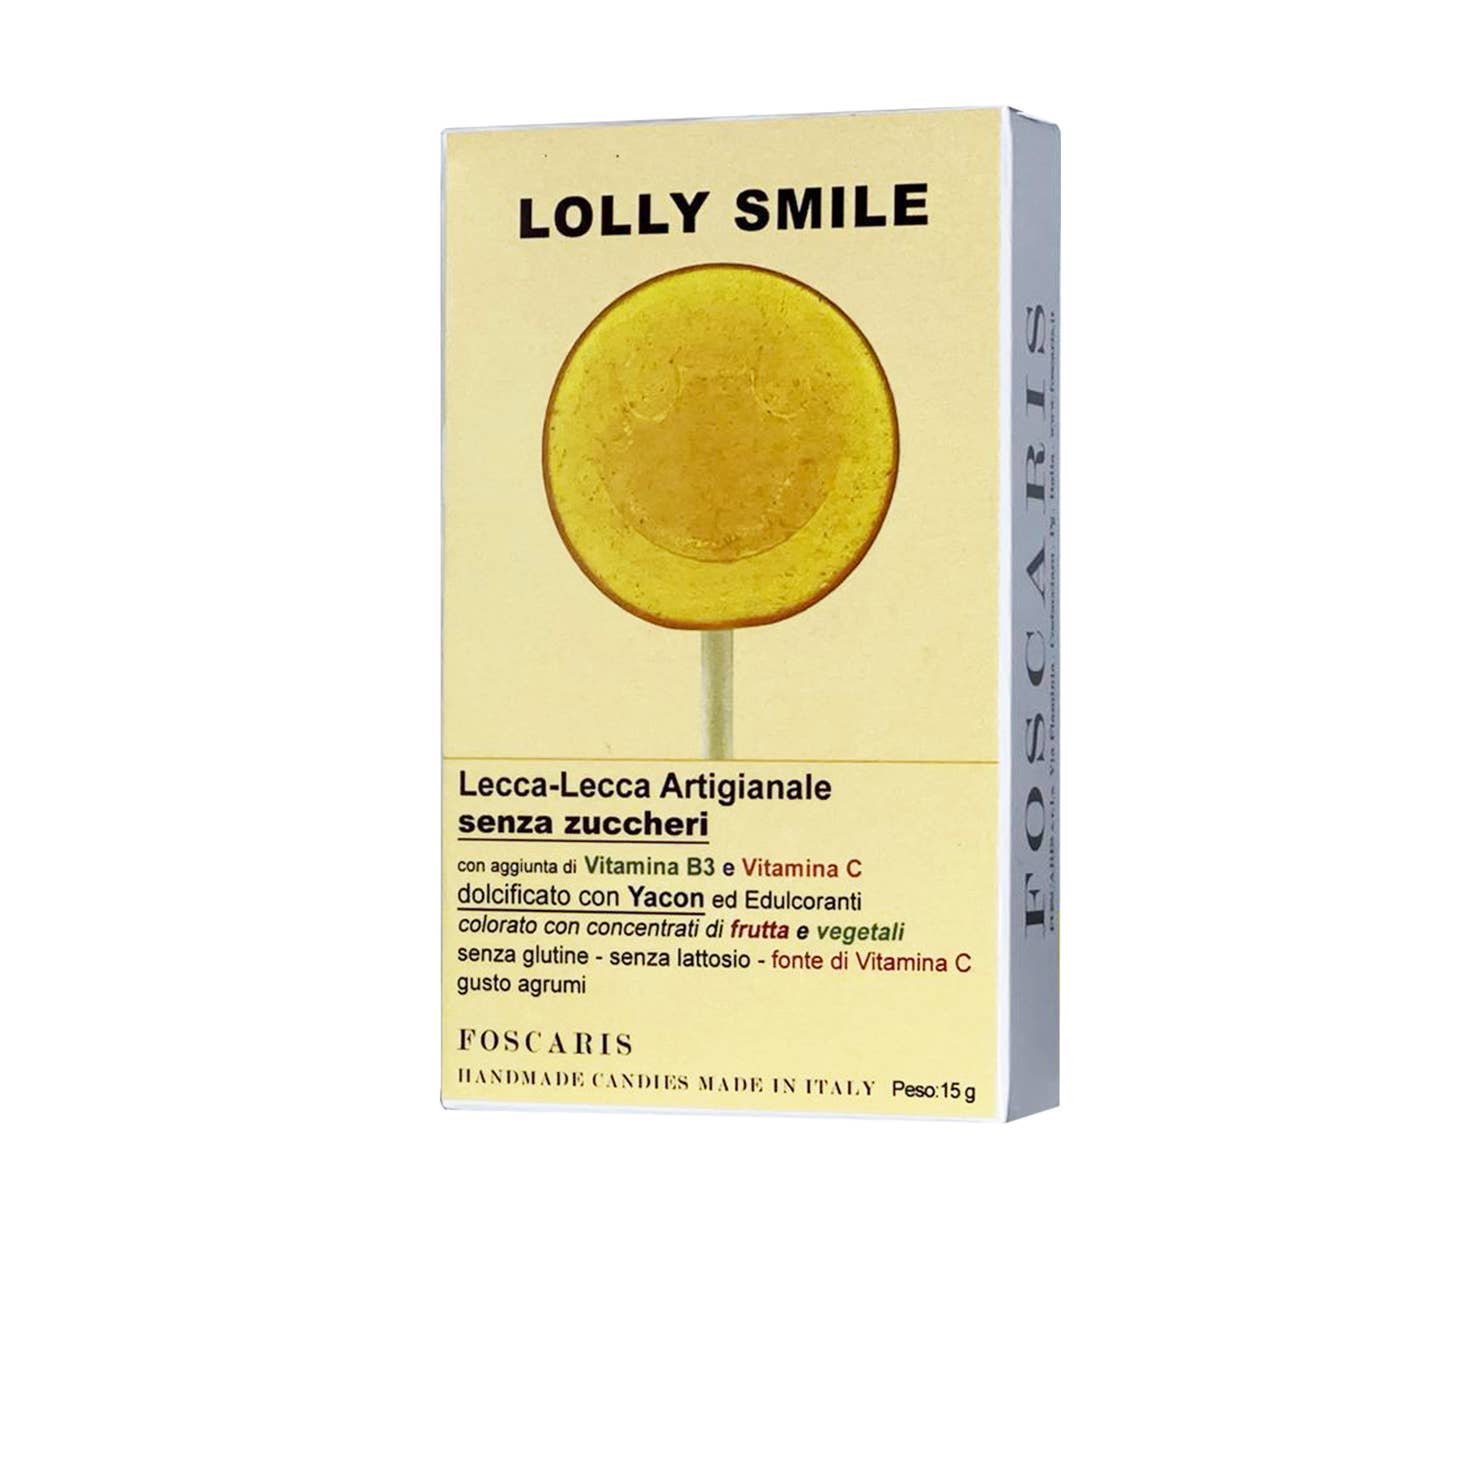 Lolly with citrus flavour